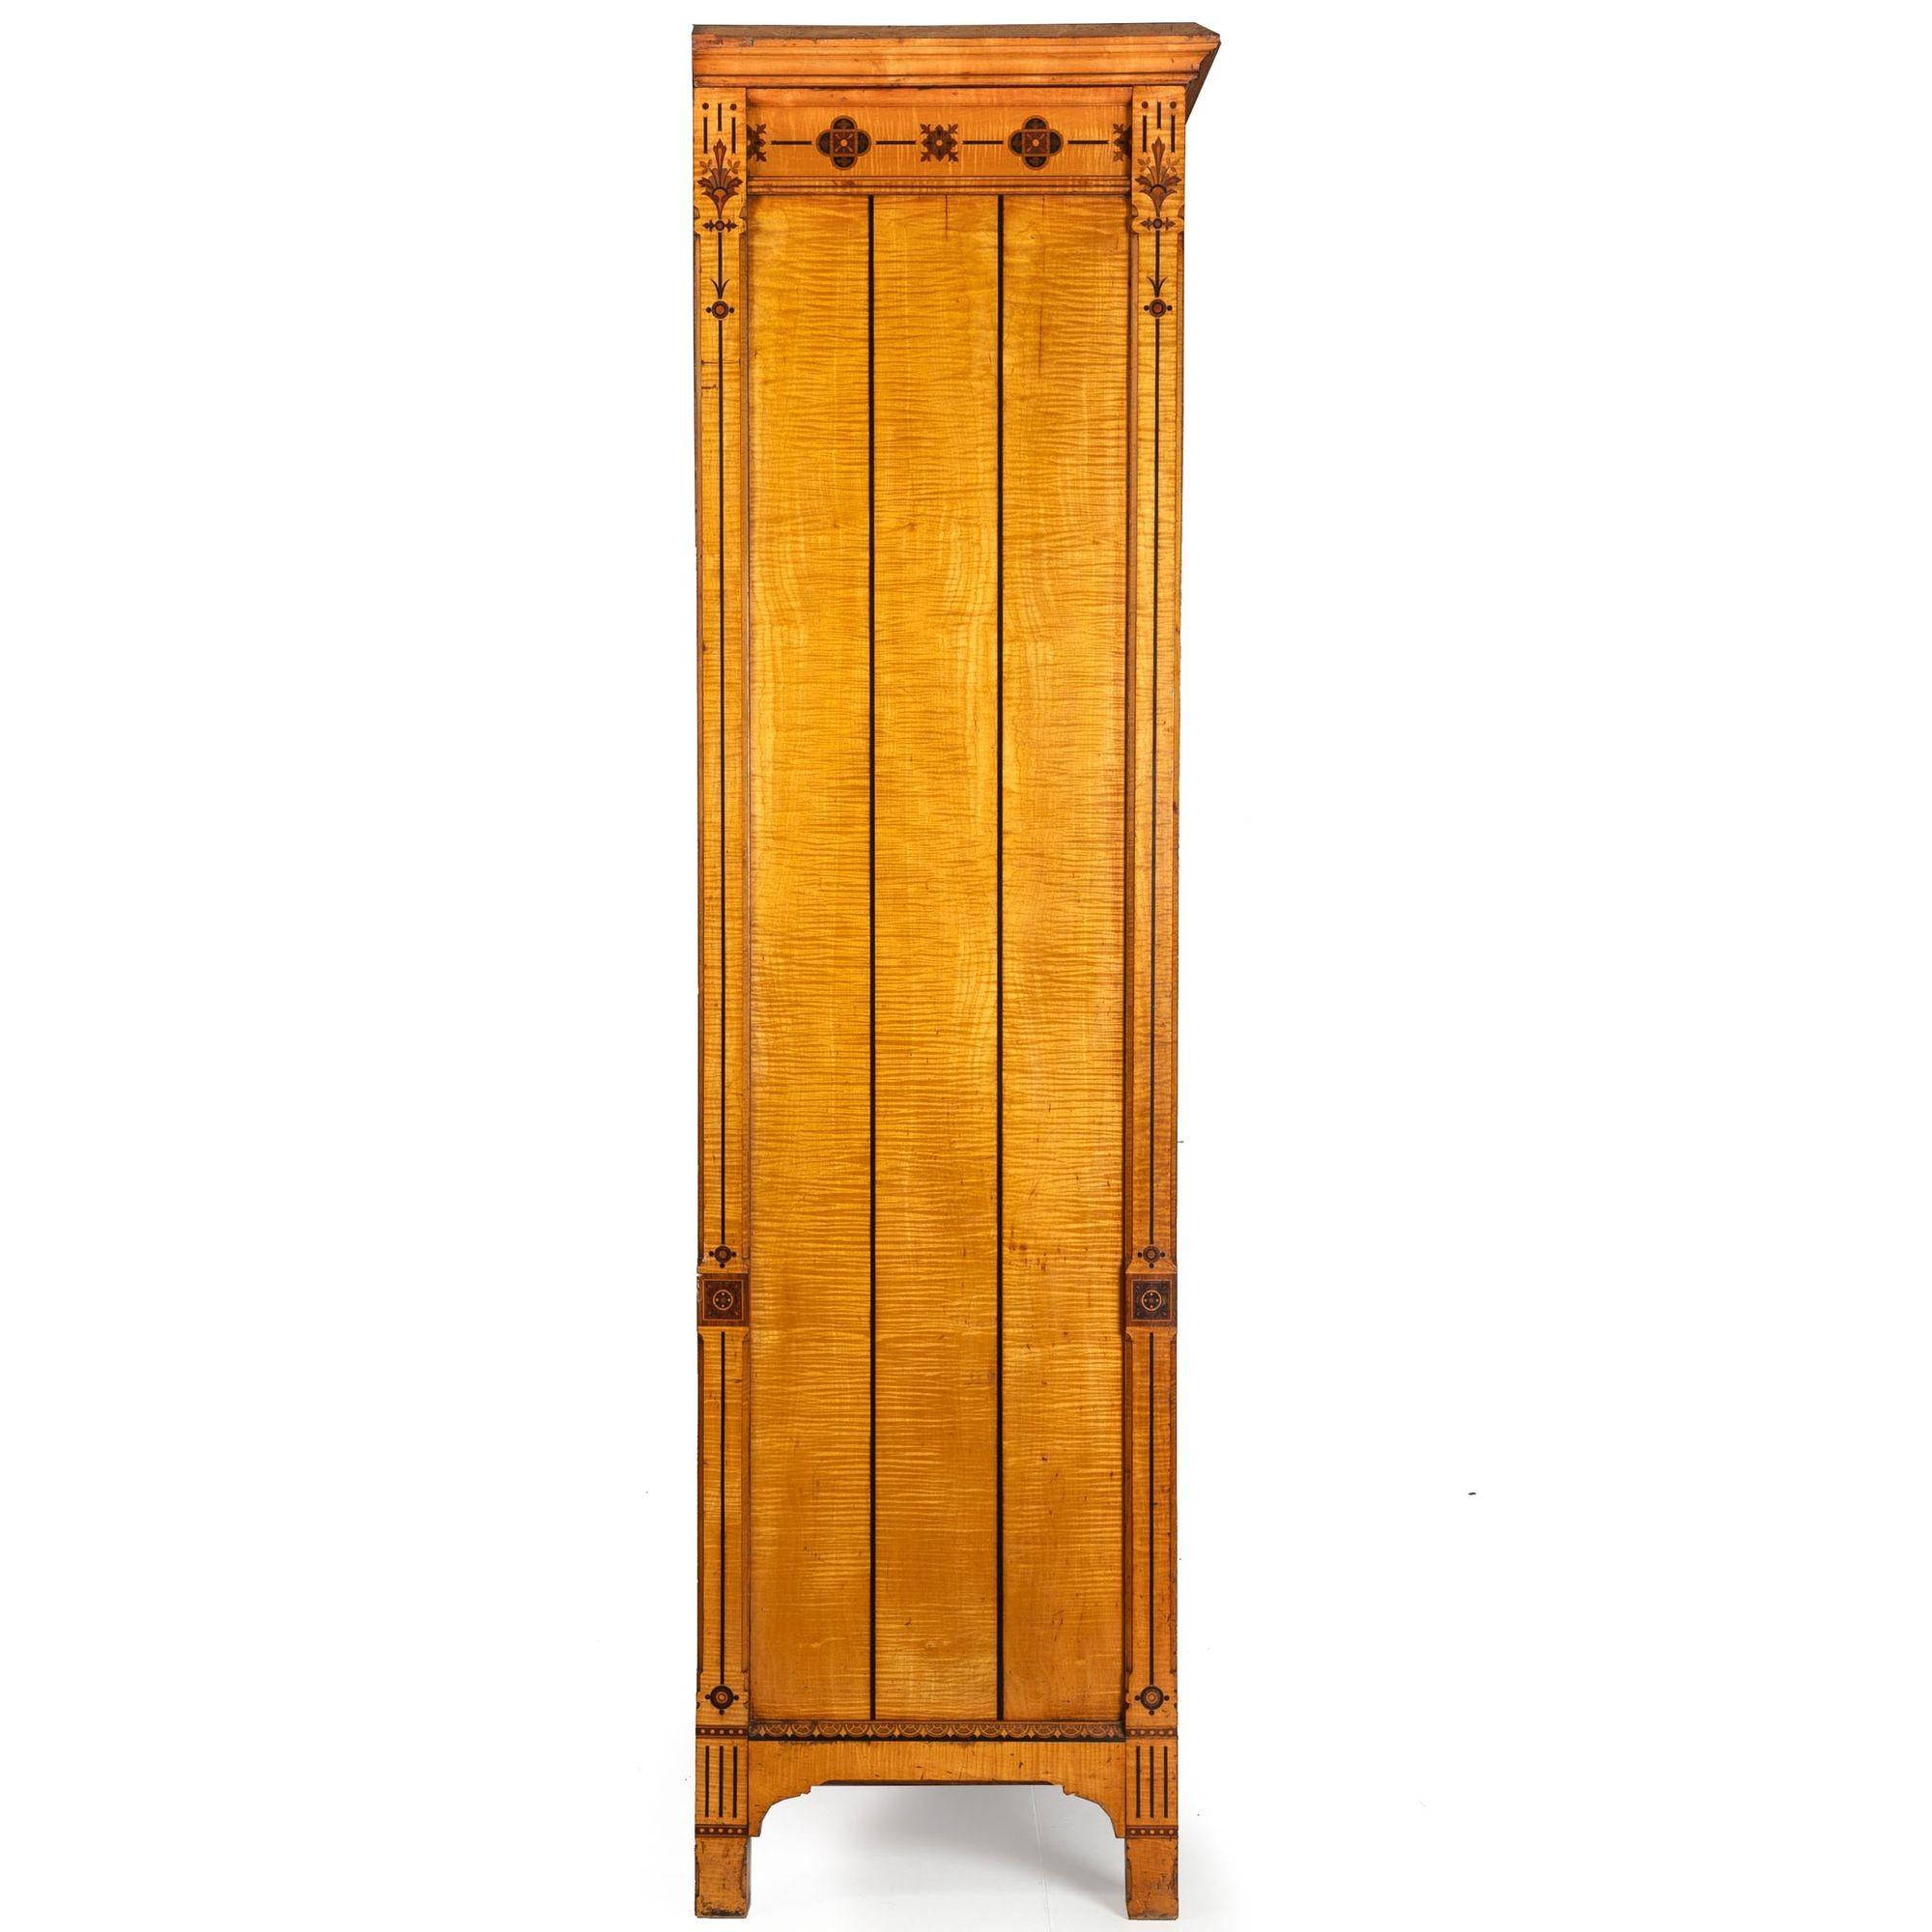 English Edwardian Antique Satinwood Three-Door Armoire Wardrobe c. 1880s In Good Condition For Sale In Shippensburg, PA